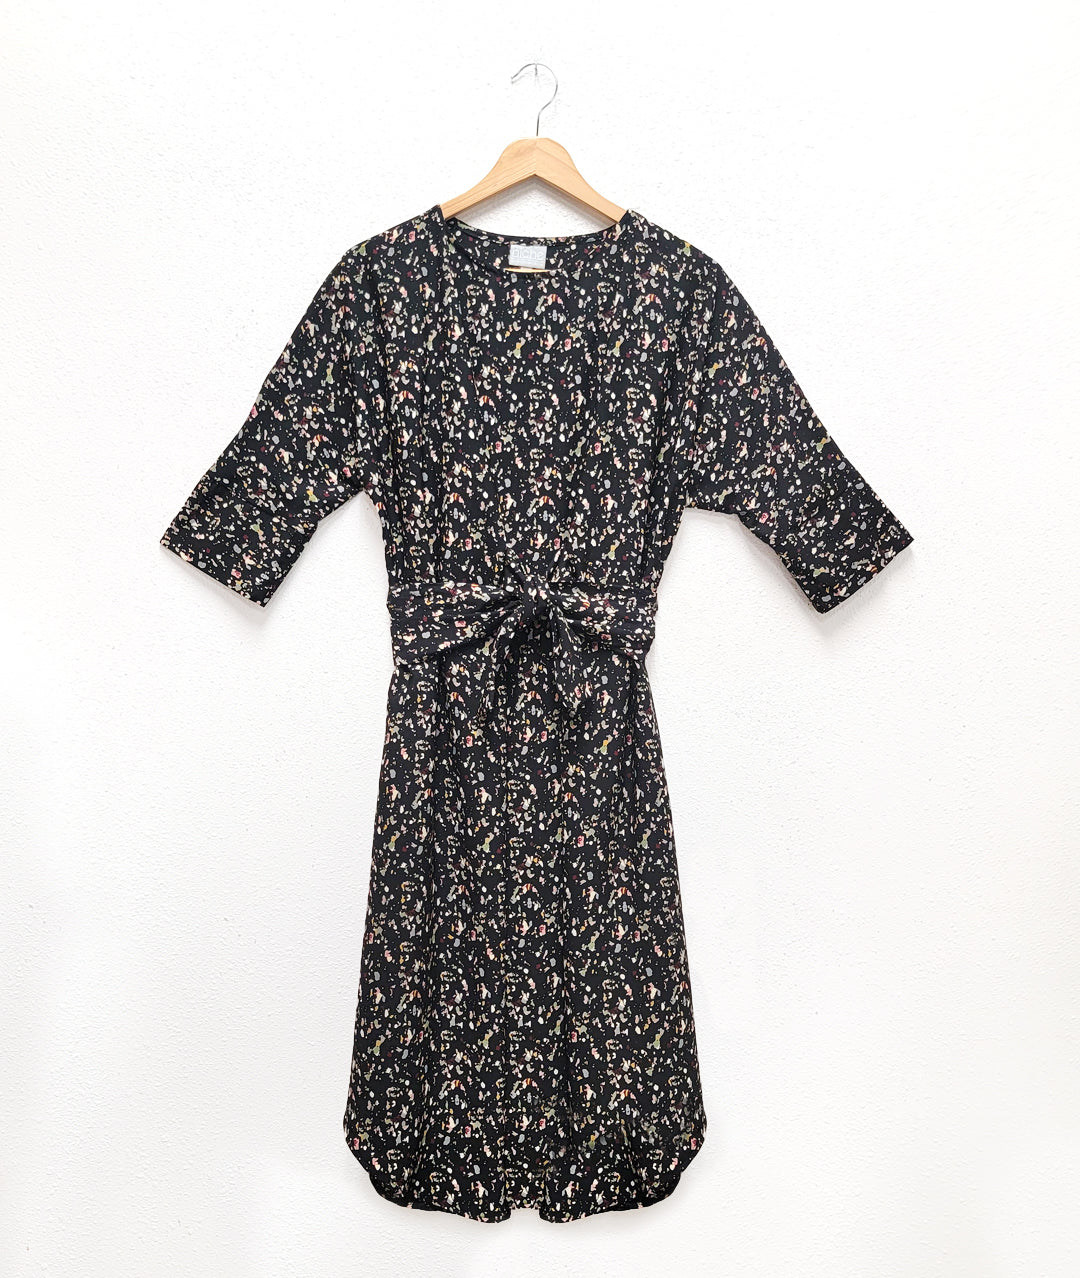 black terrazzo print dress with a kimono style sleeve and a center waist tie belt that can be worn in a number of ways